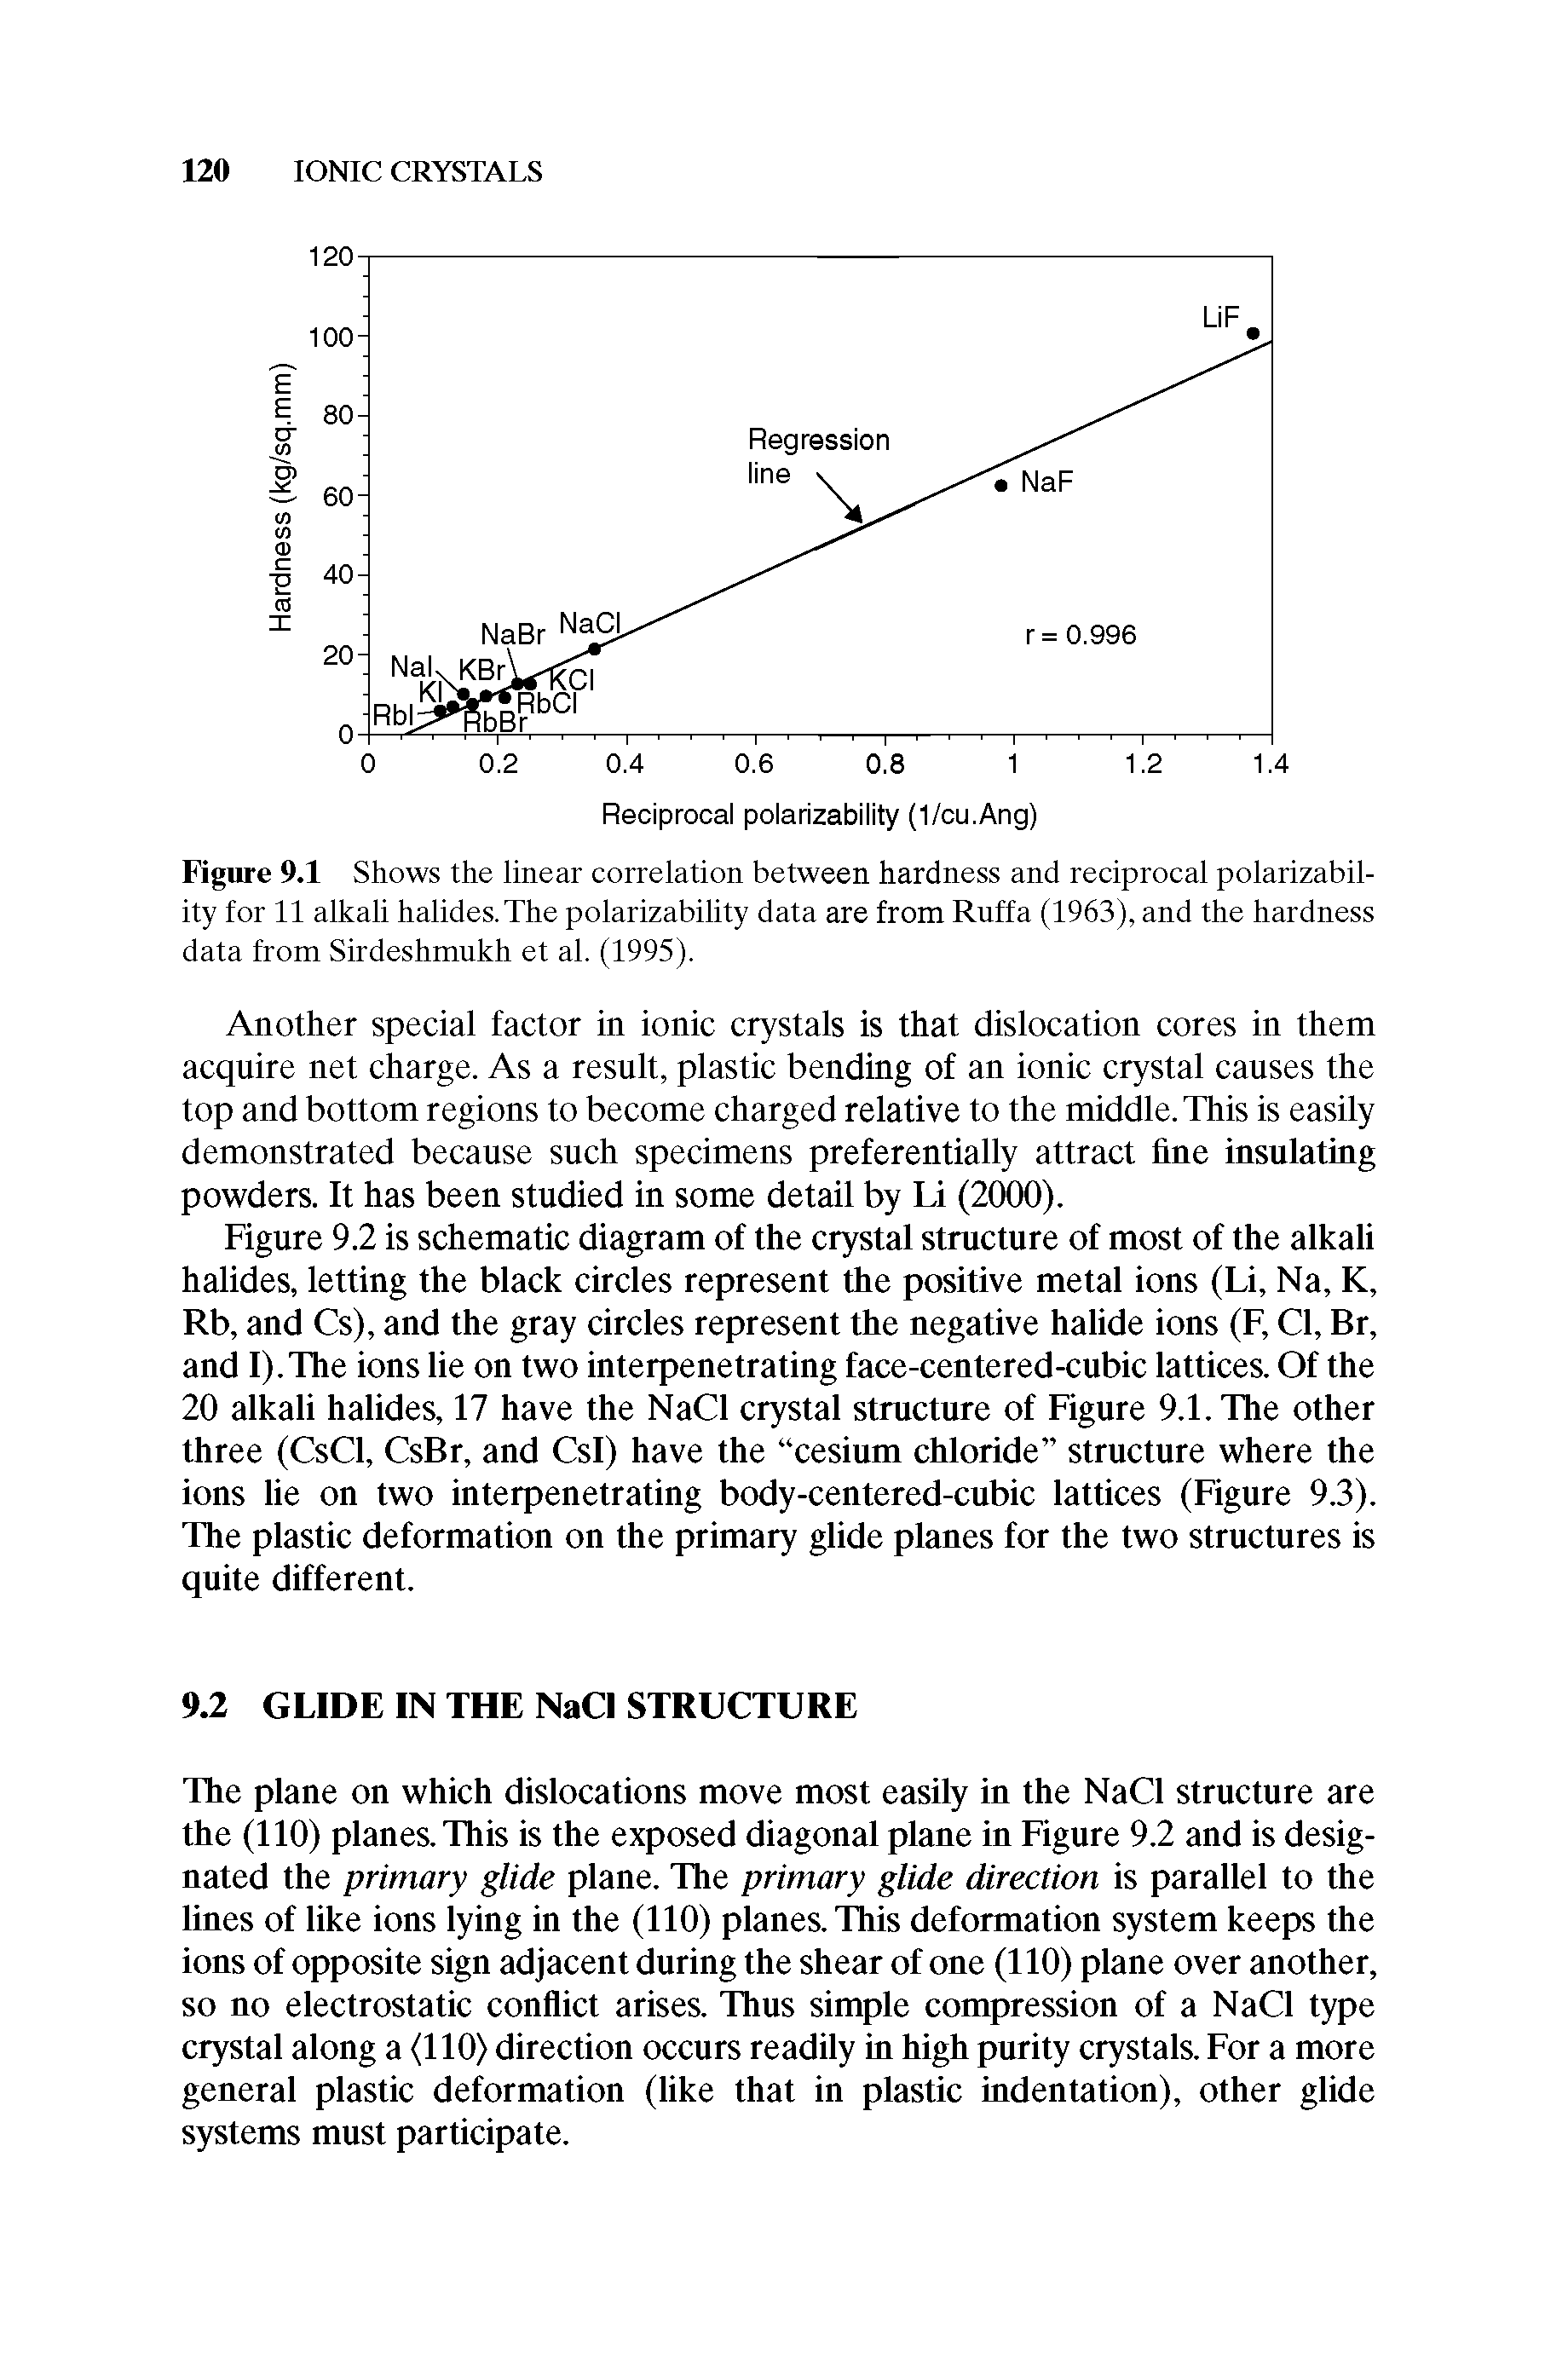 Figure 9.1 Shows the linear correlation between hardness and reciprocal polarizability for 11 alkali halides. The polarizability data are from Ruffa (1963), and the hardness data from Sirdeshmukh et al. (1995).